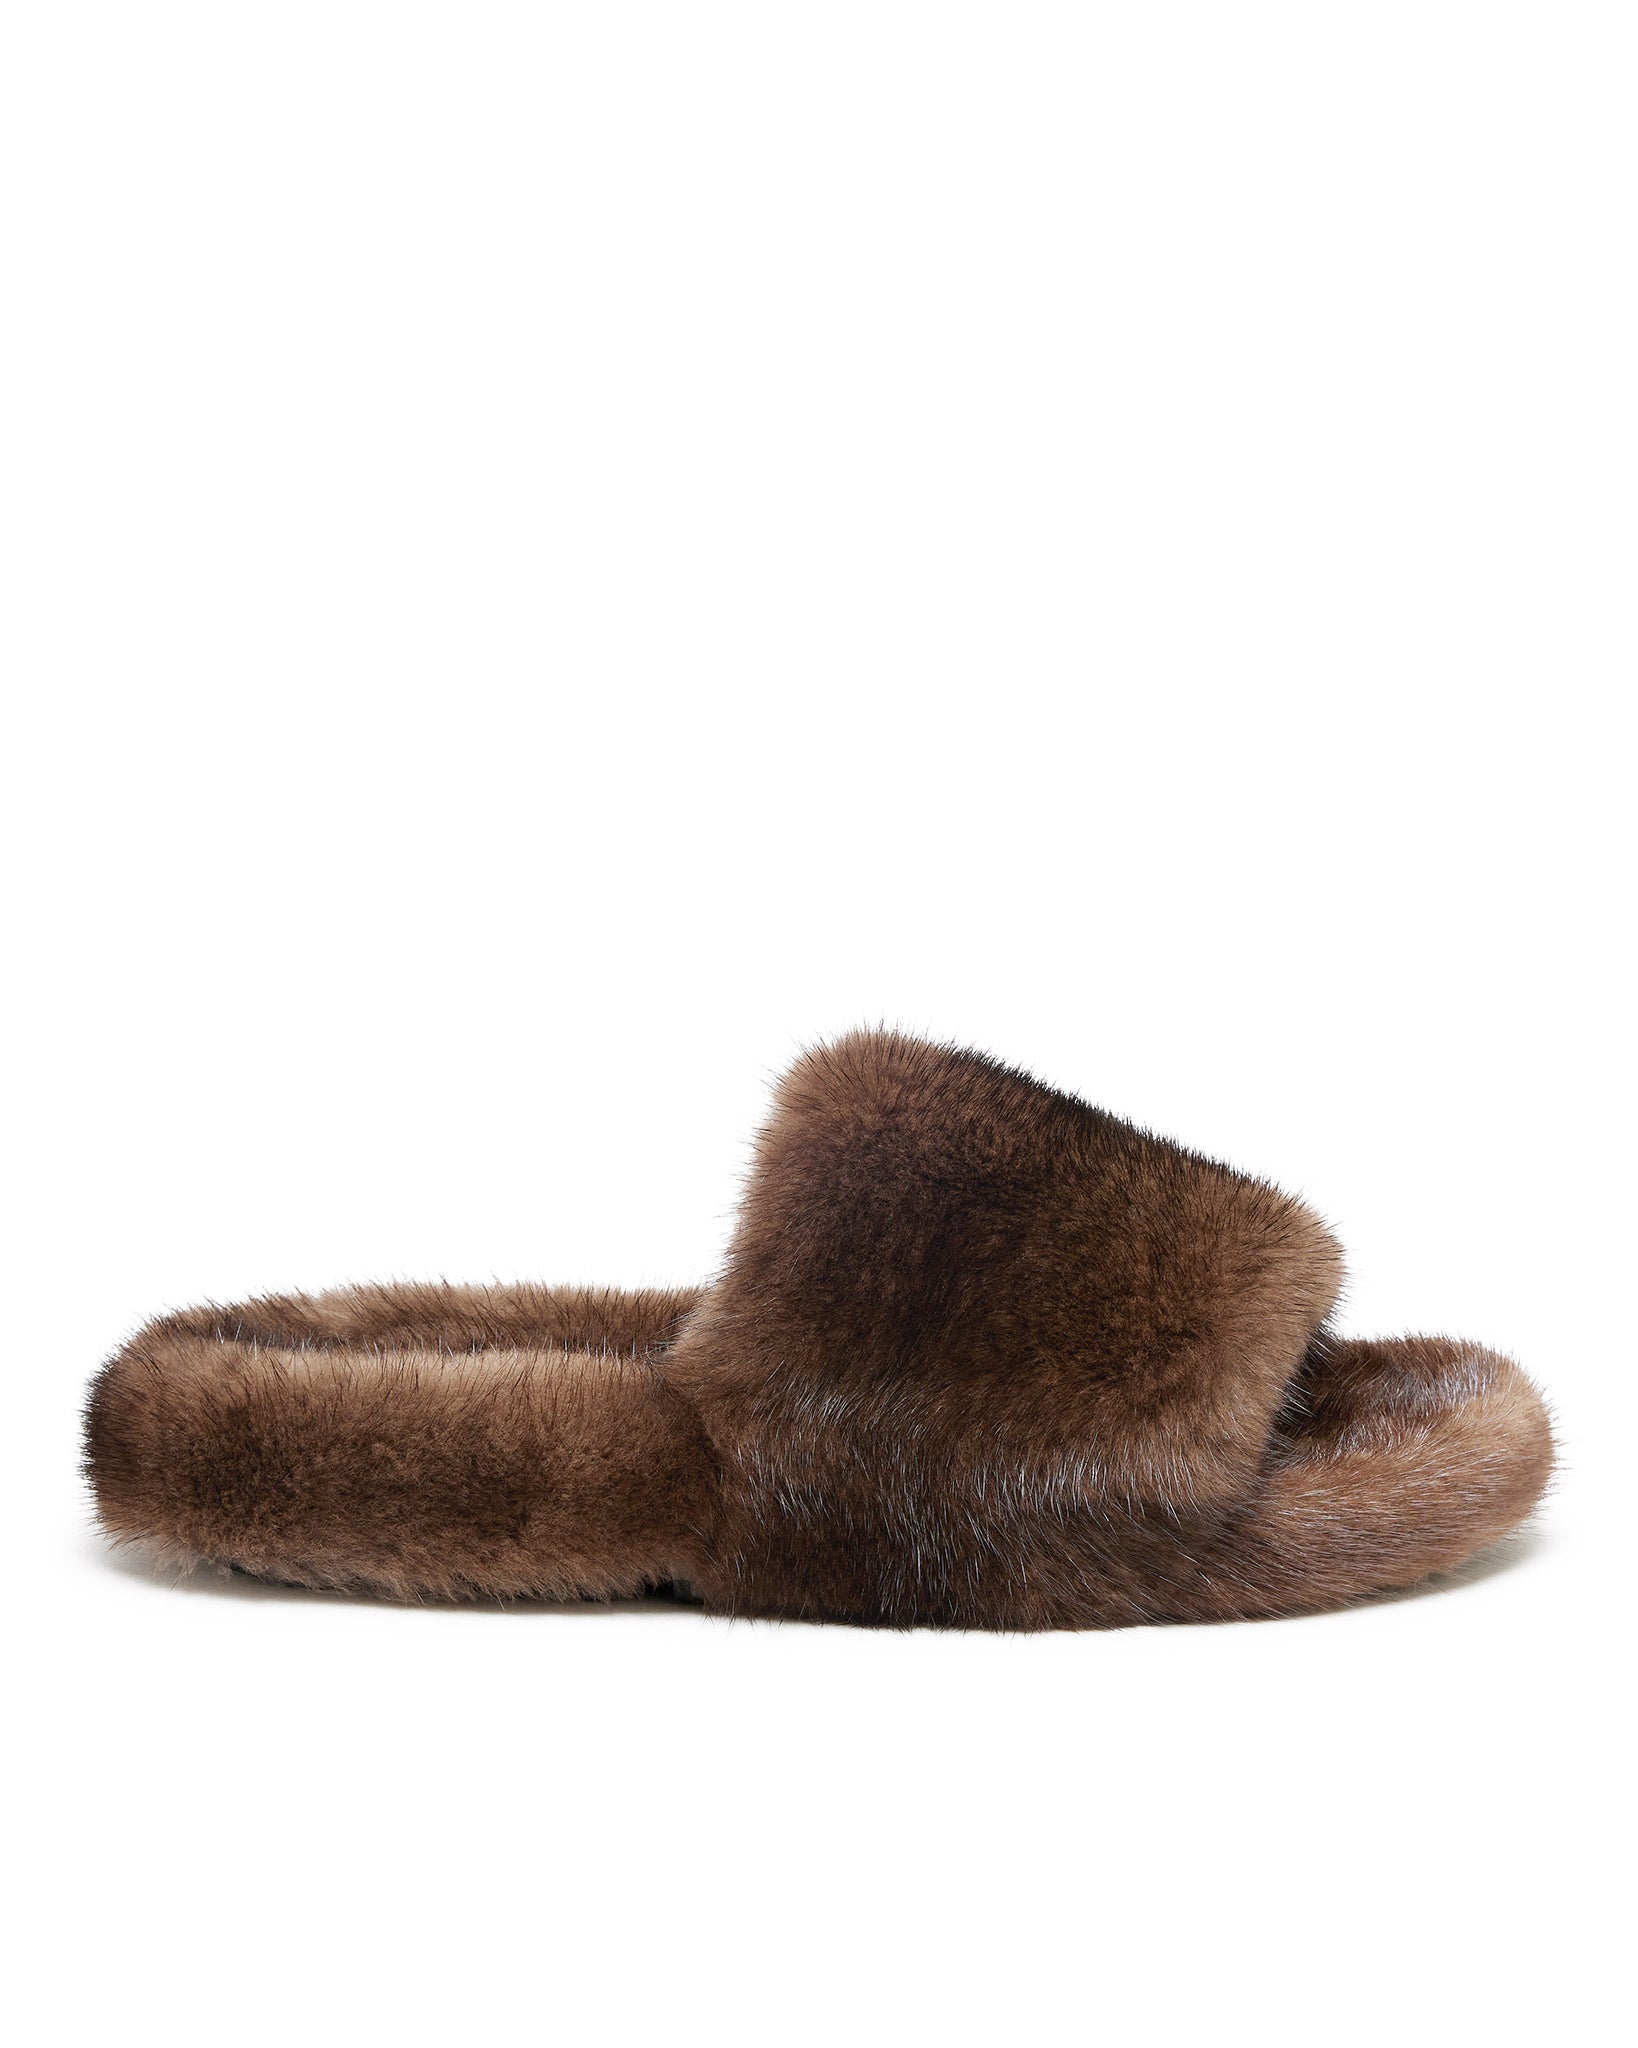 Lithunium on Twitter  Louis vuitton slippers, Fluffy shoes, Louis